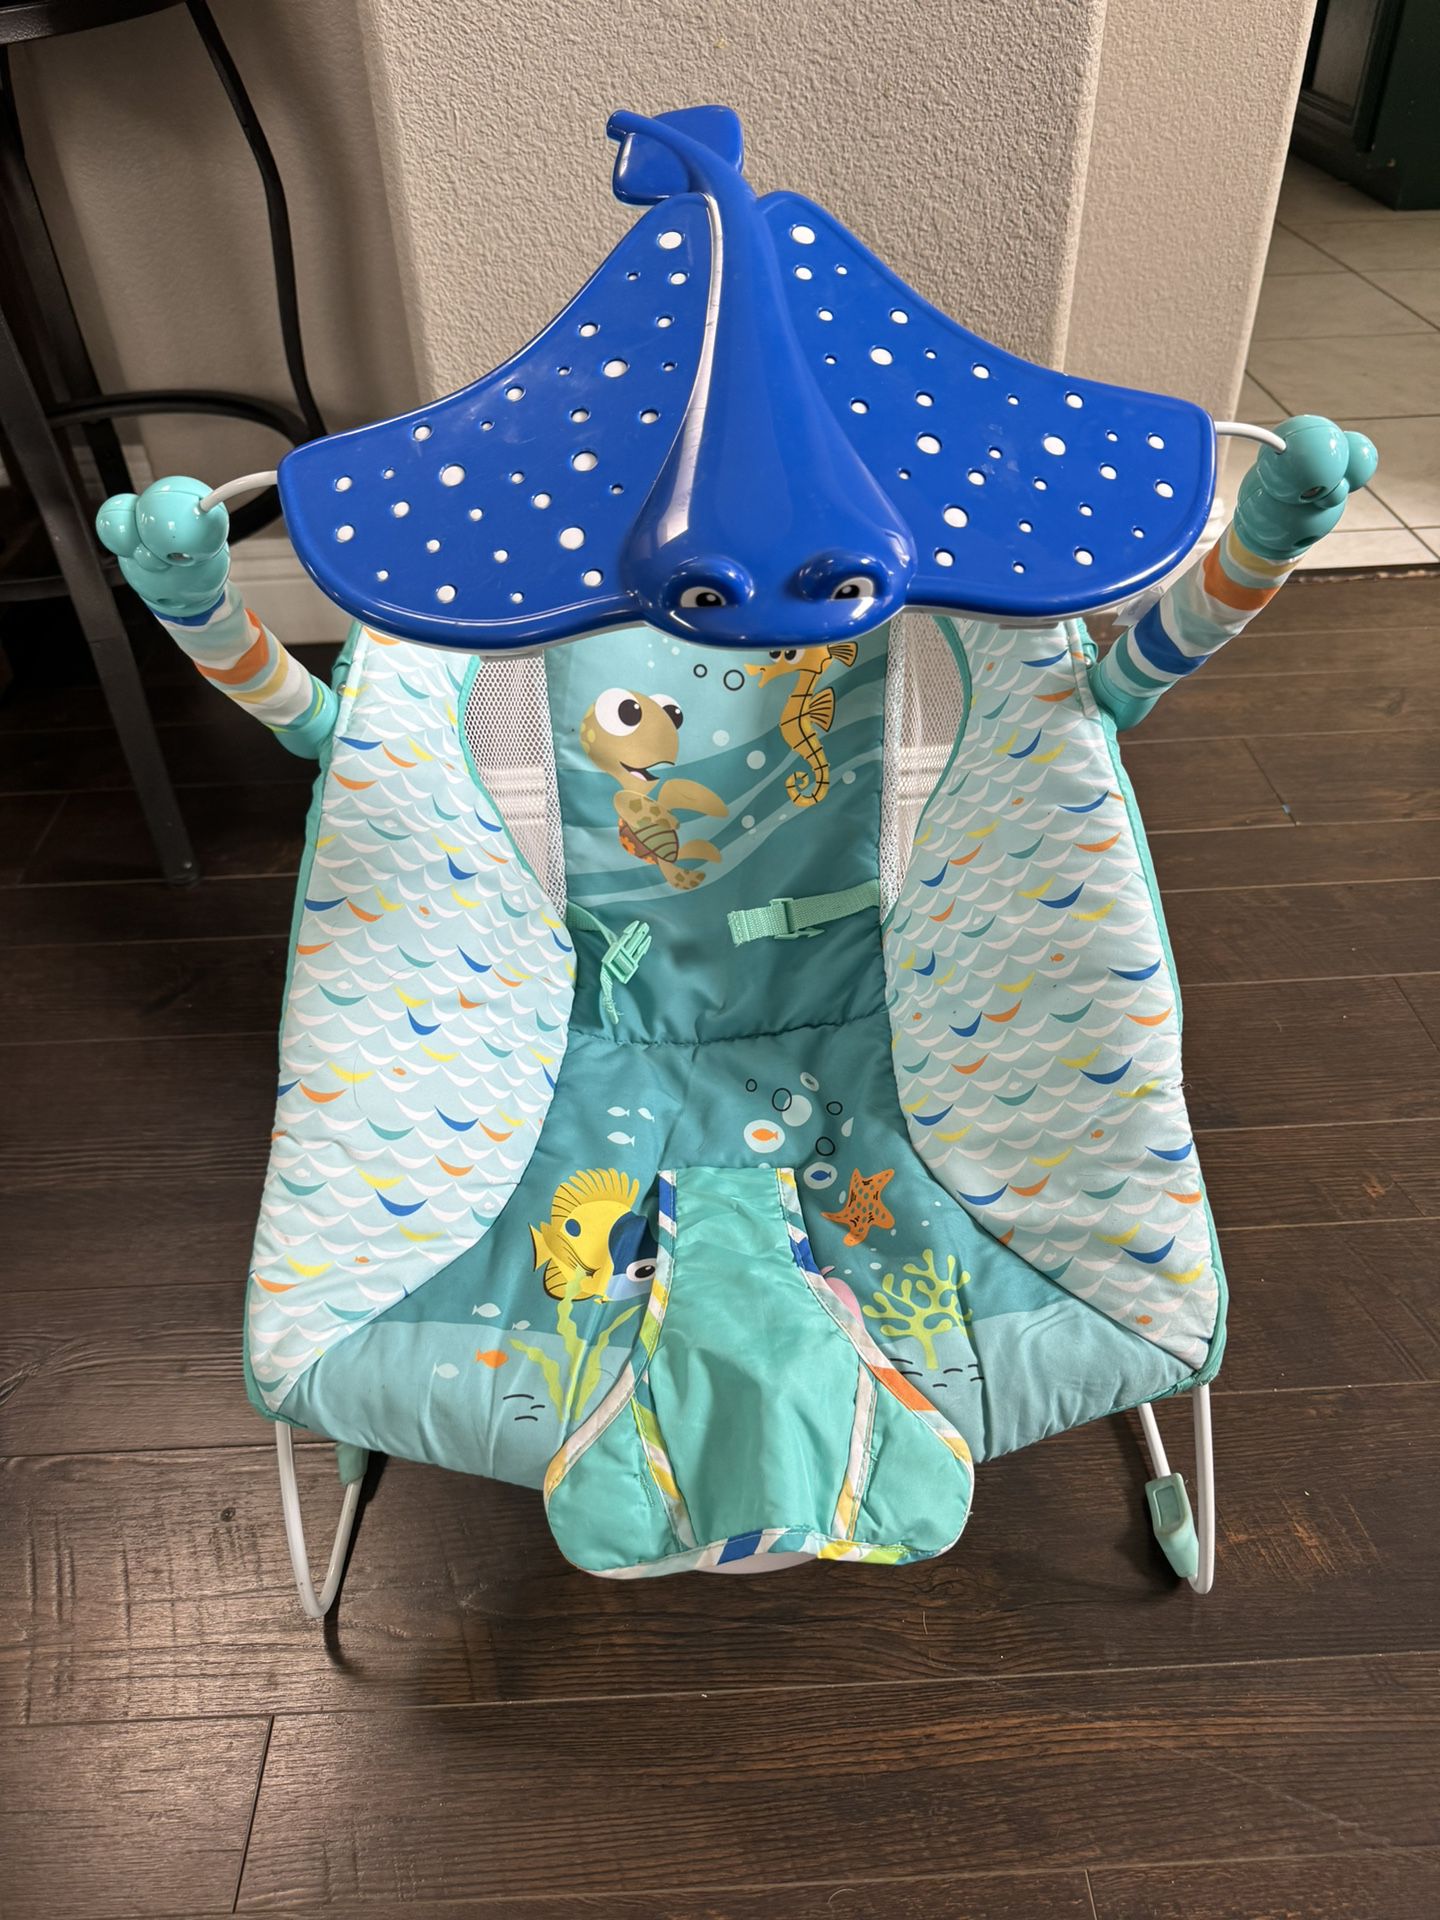 Baby Bouncer (chair)